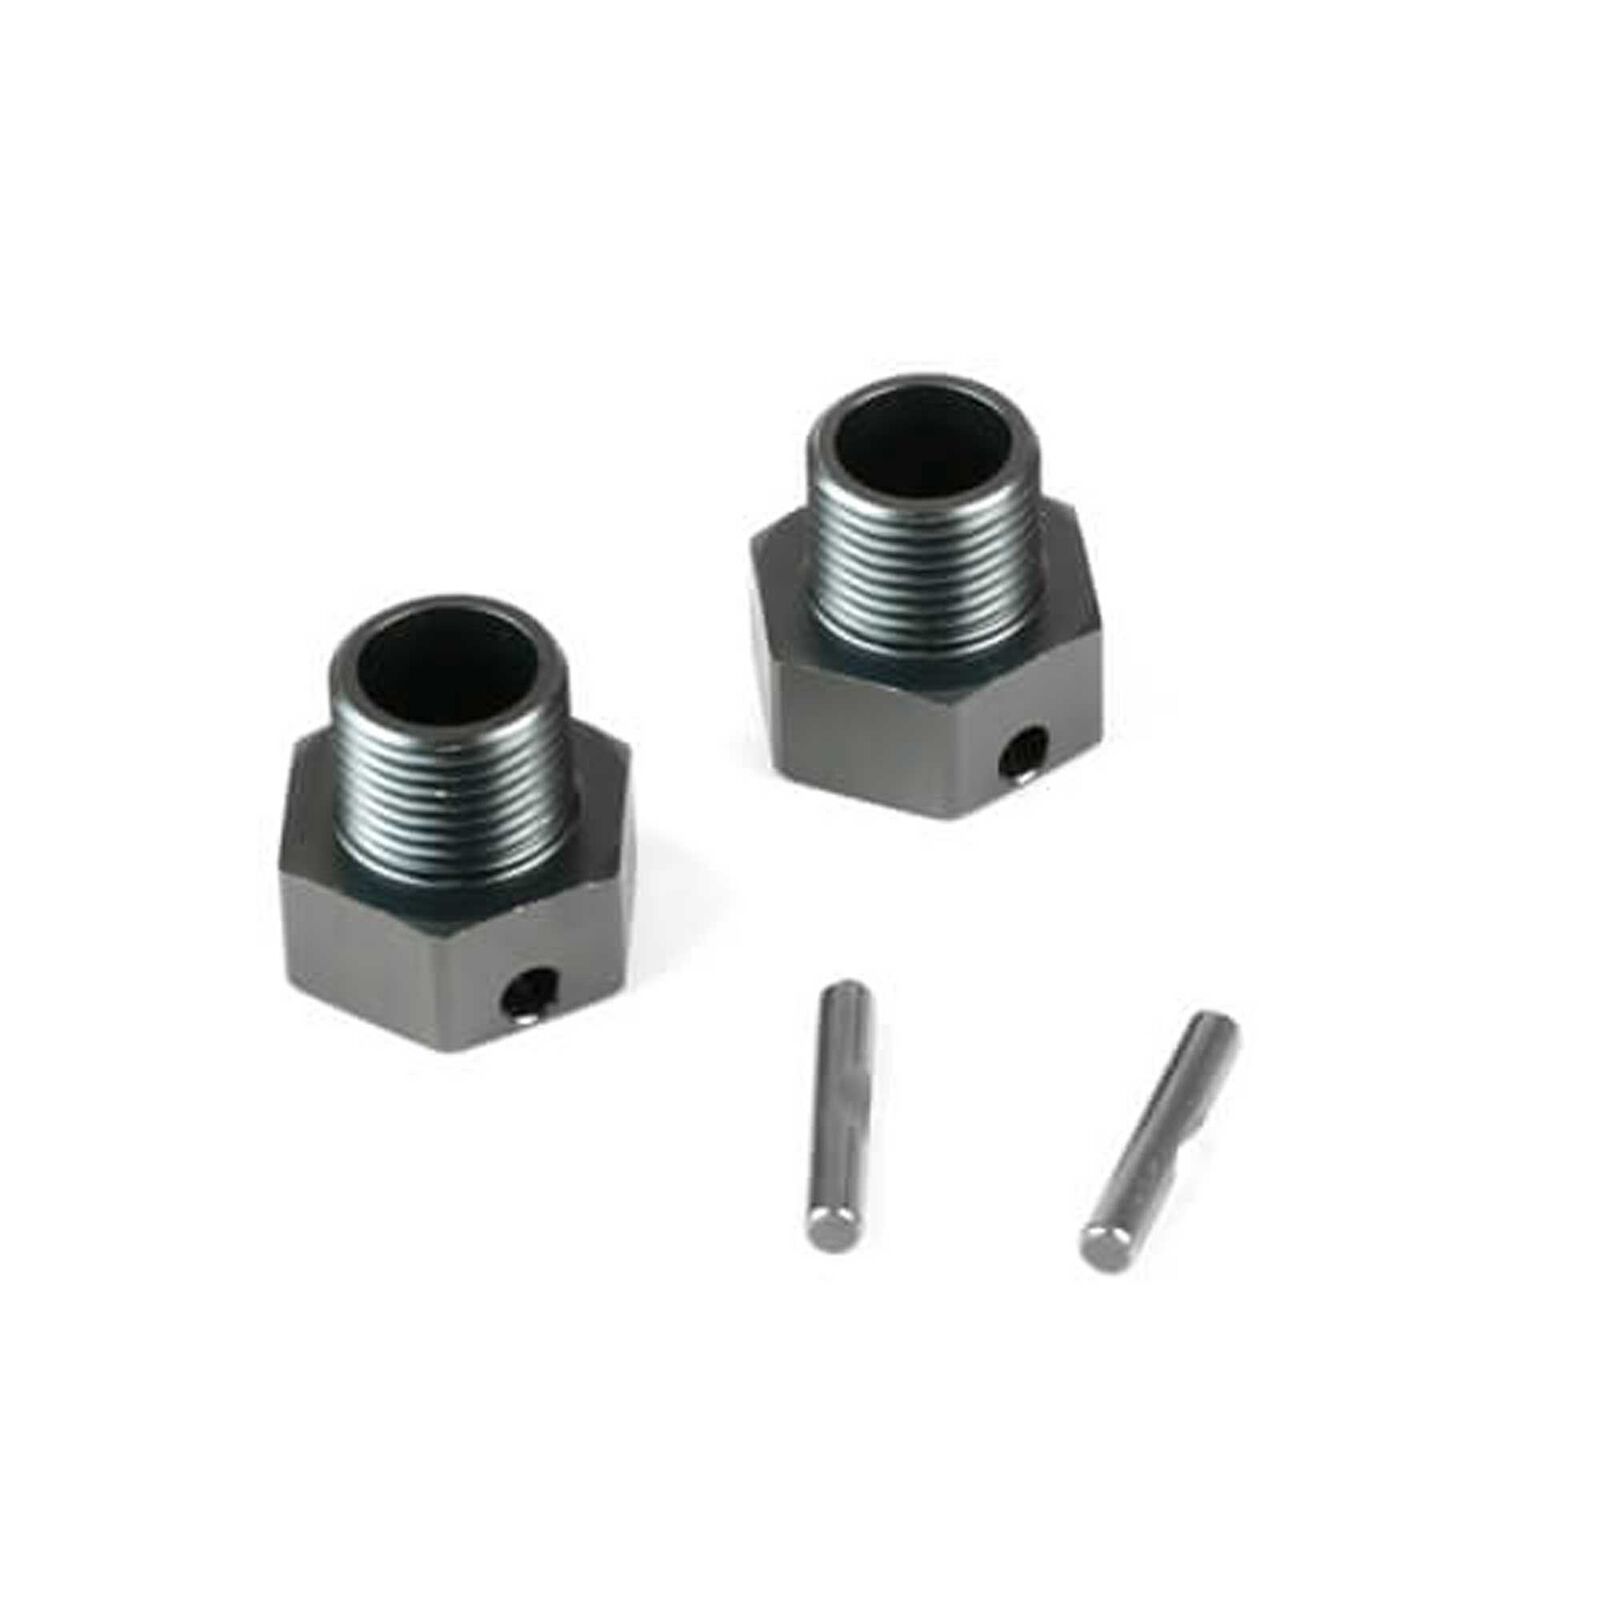 Wheel Hubs with Pins, +4mm offset, 17mm (2)